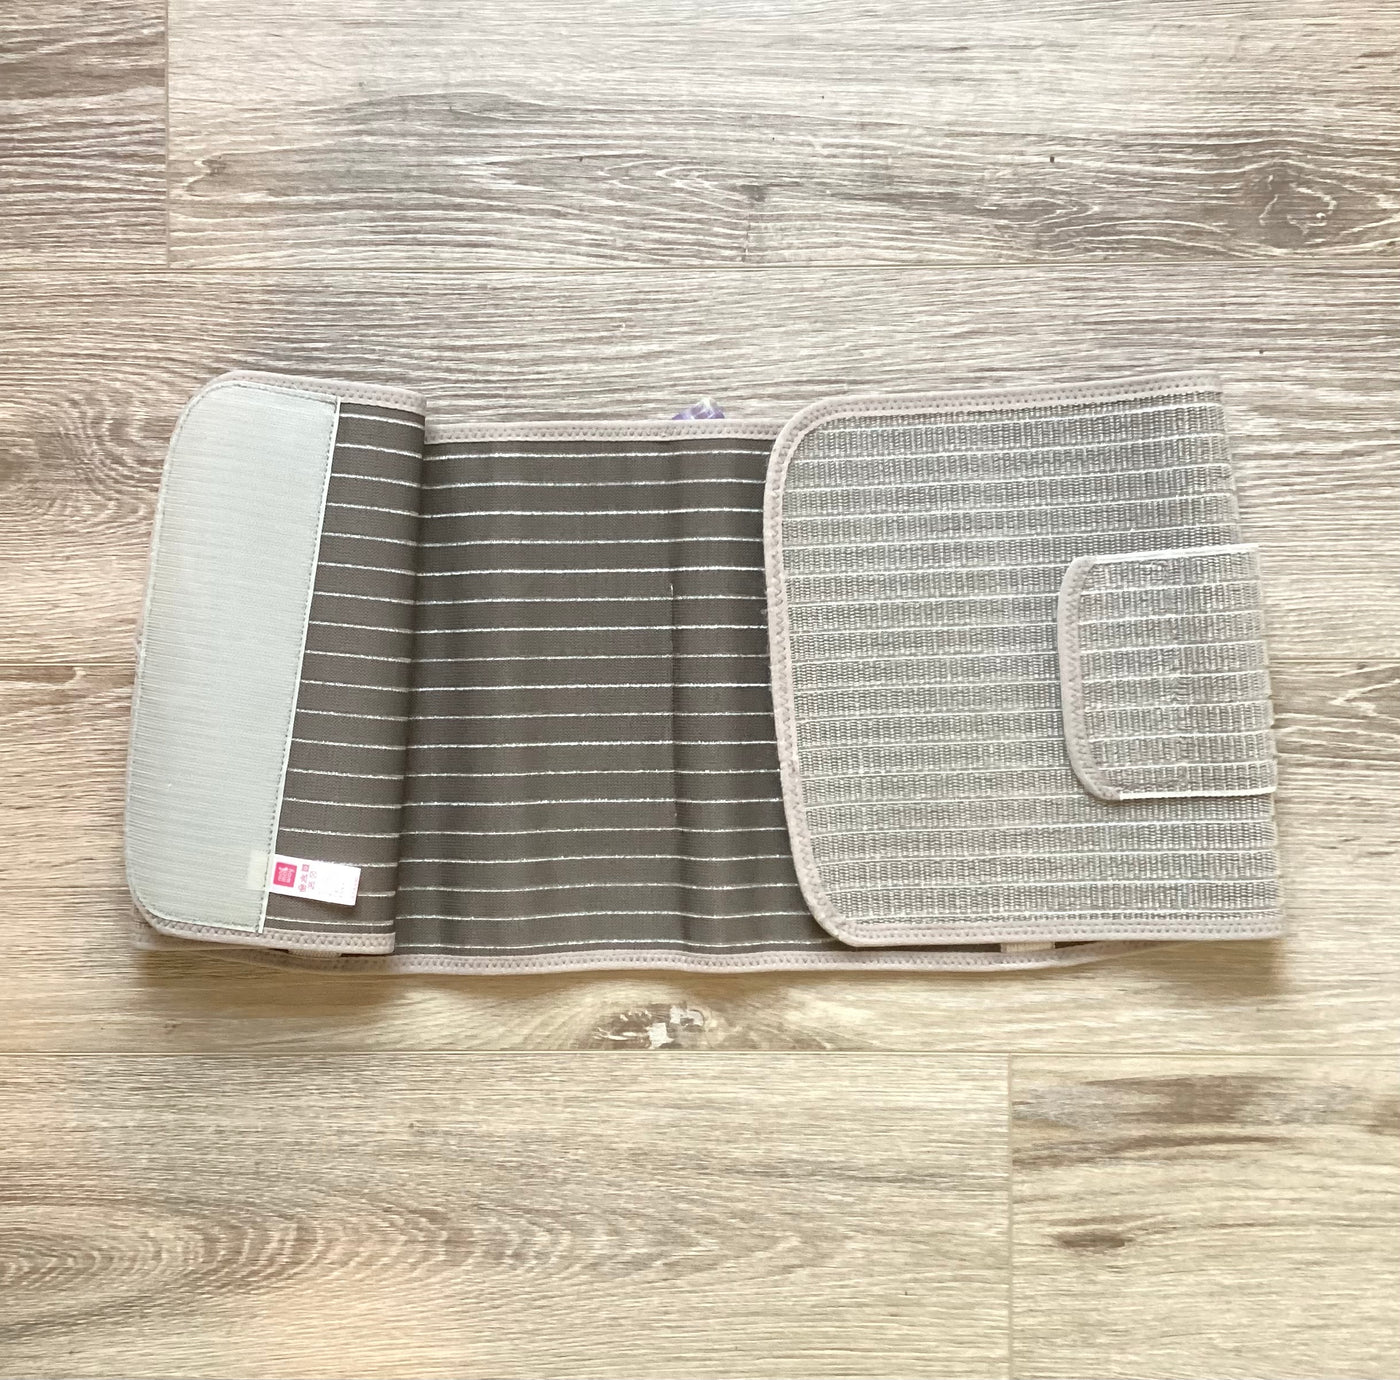 Mamaway grey bamboo postpartum belly band (BNWT) - Size M (Approx UK 10/12)